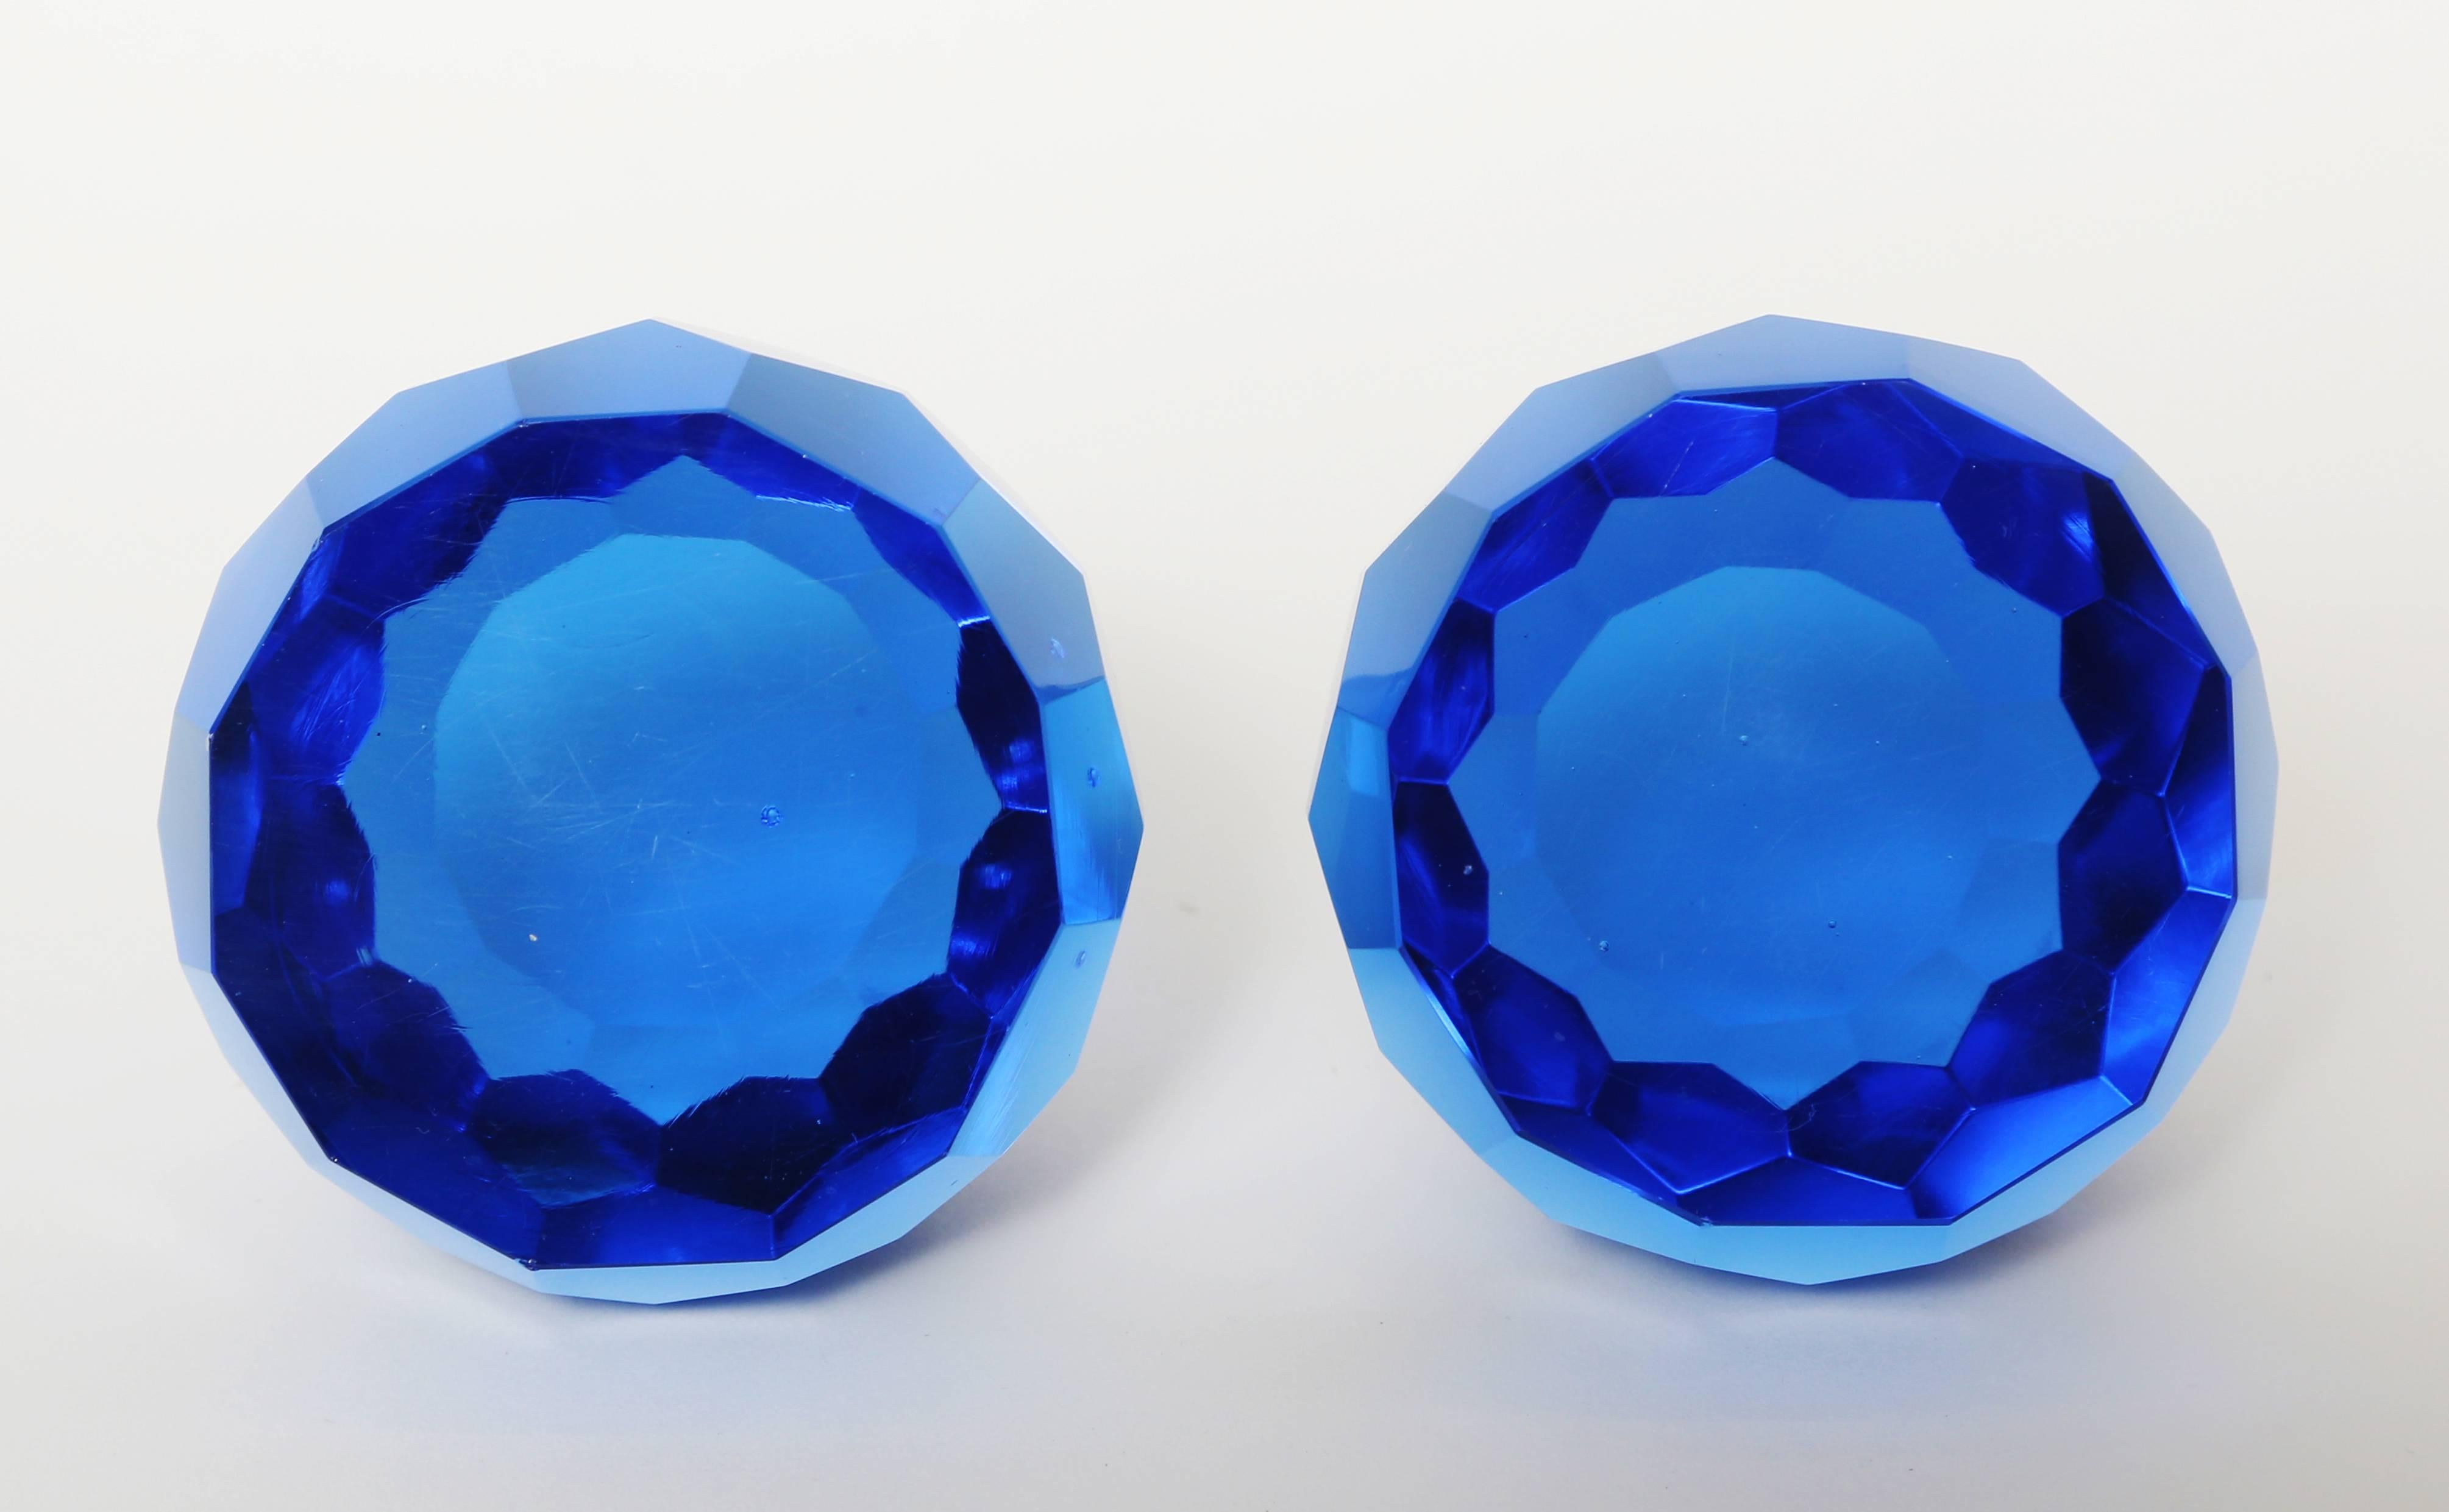 Hand-Crafted Matched Pair of Cobalt Blue Faceted Crystal Paperweights